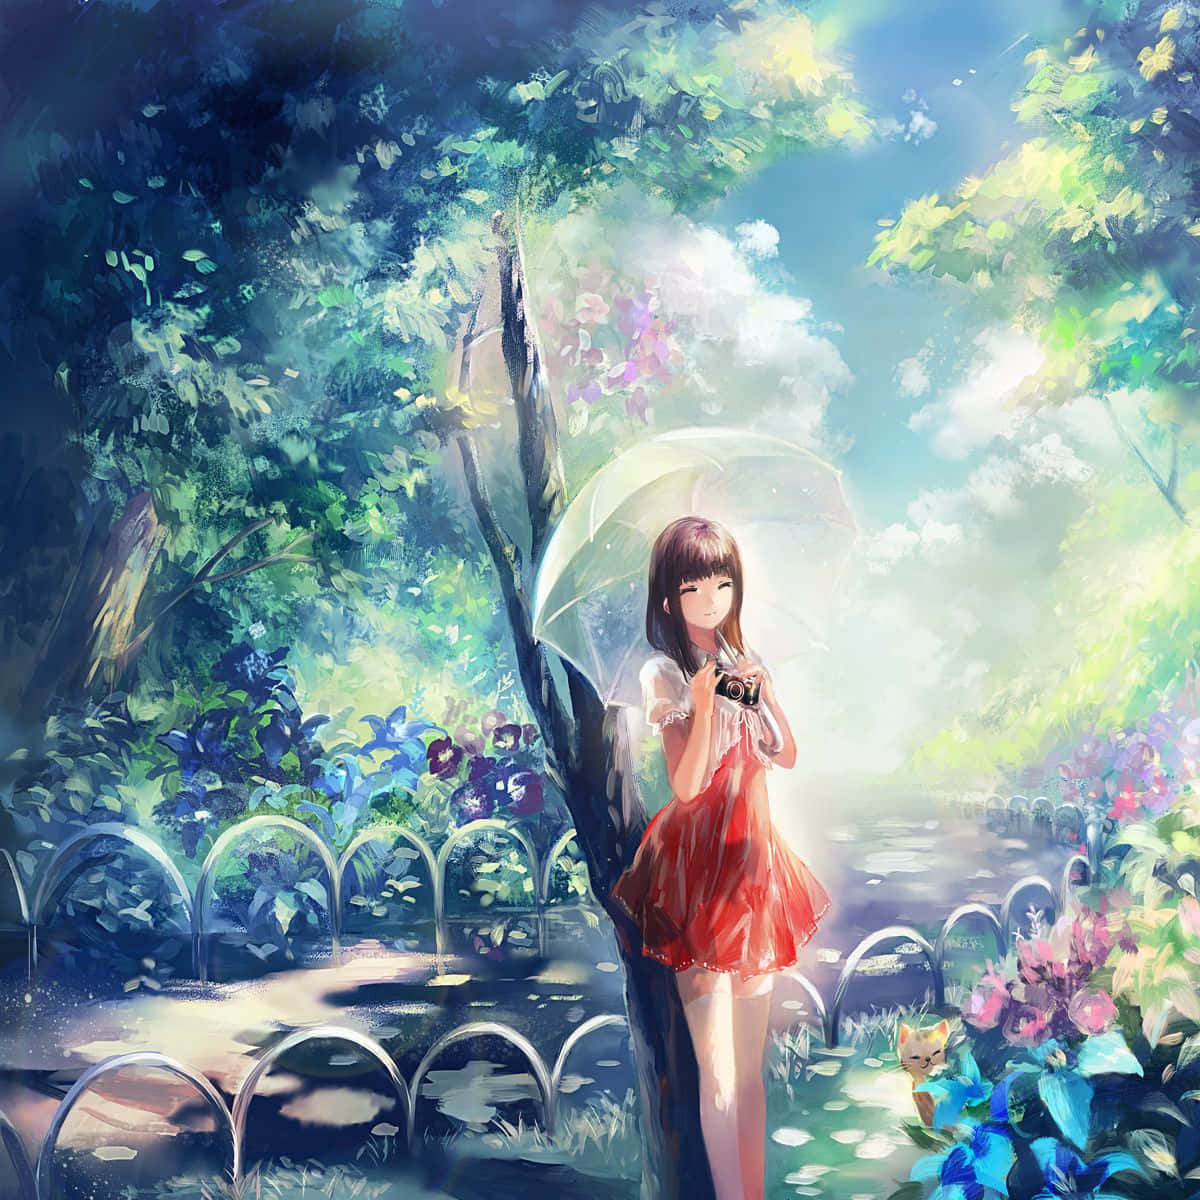 A colorful and vivid anime art featuring a girl in a blue dress.